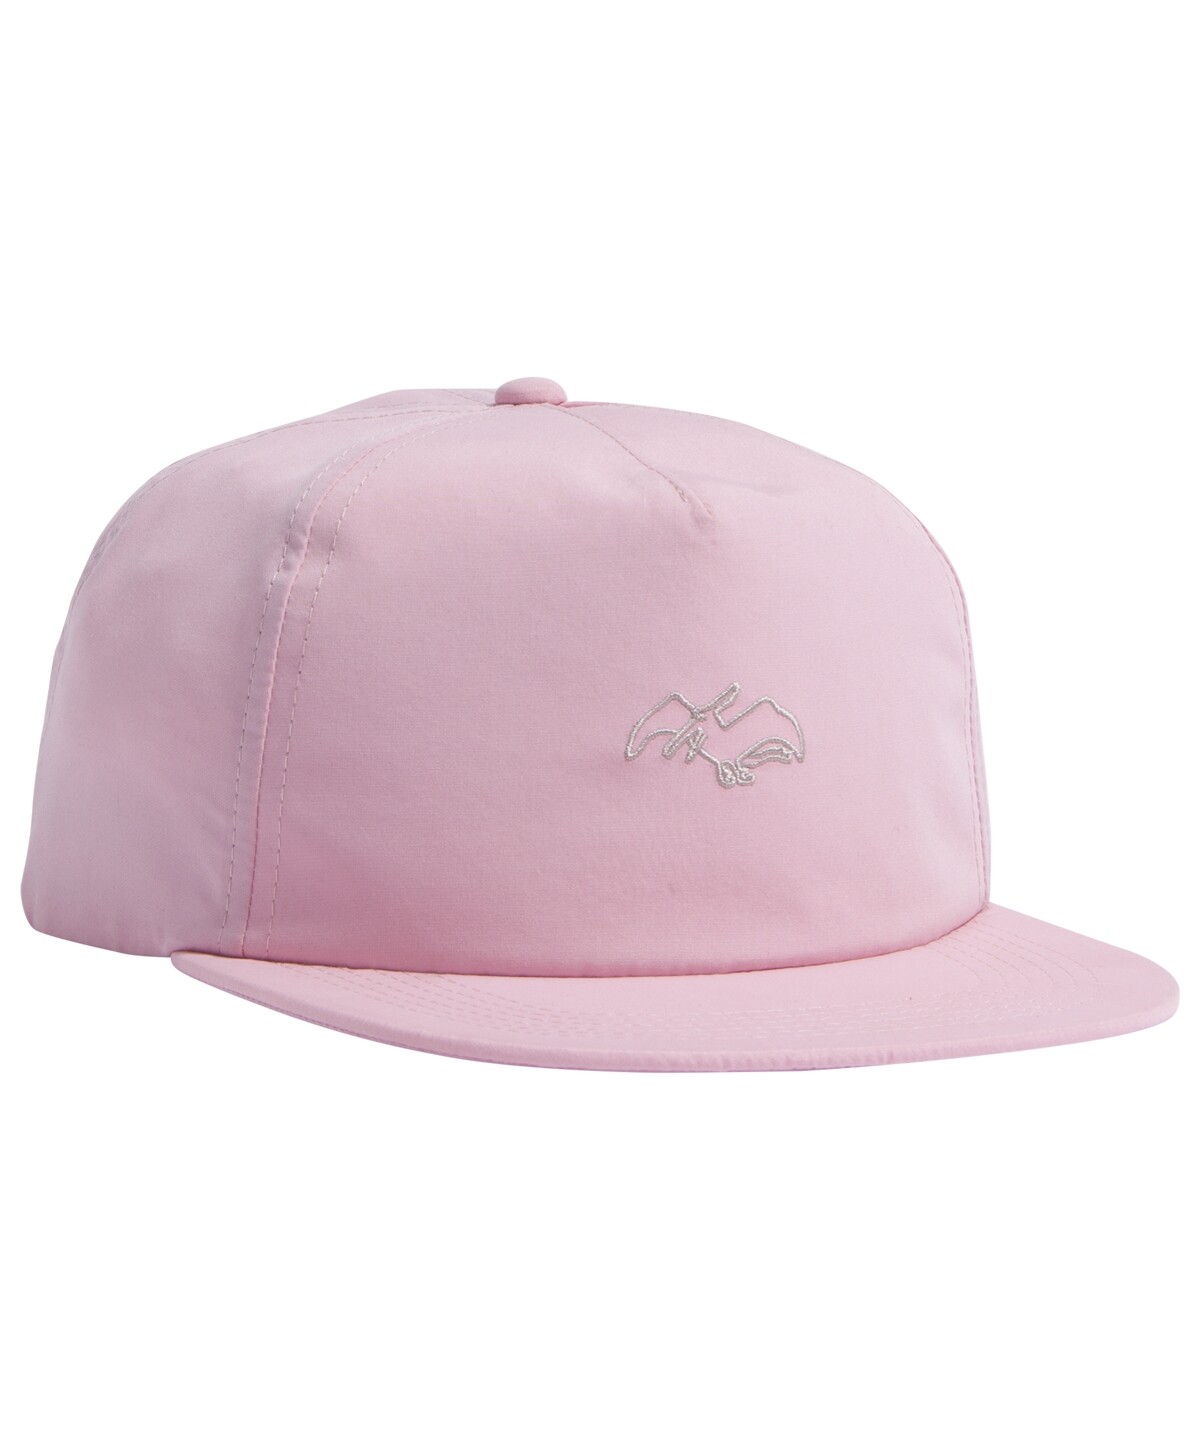 Airblaster Terry Soft Top Cap pale pink